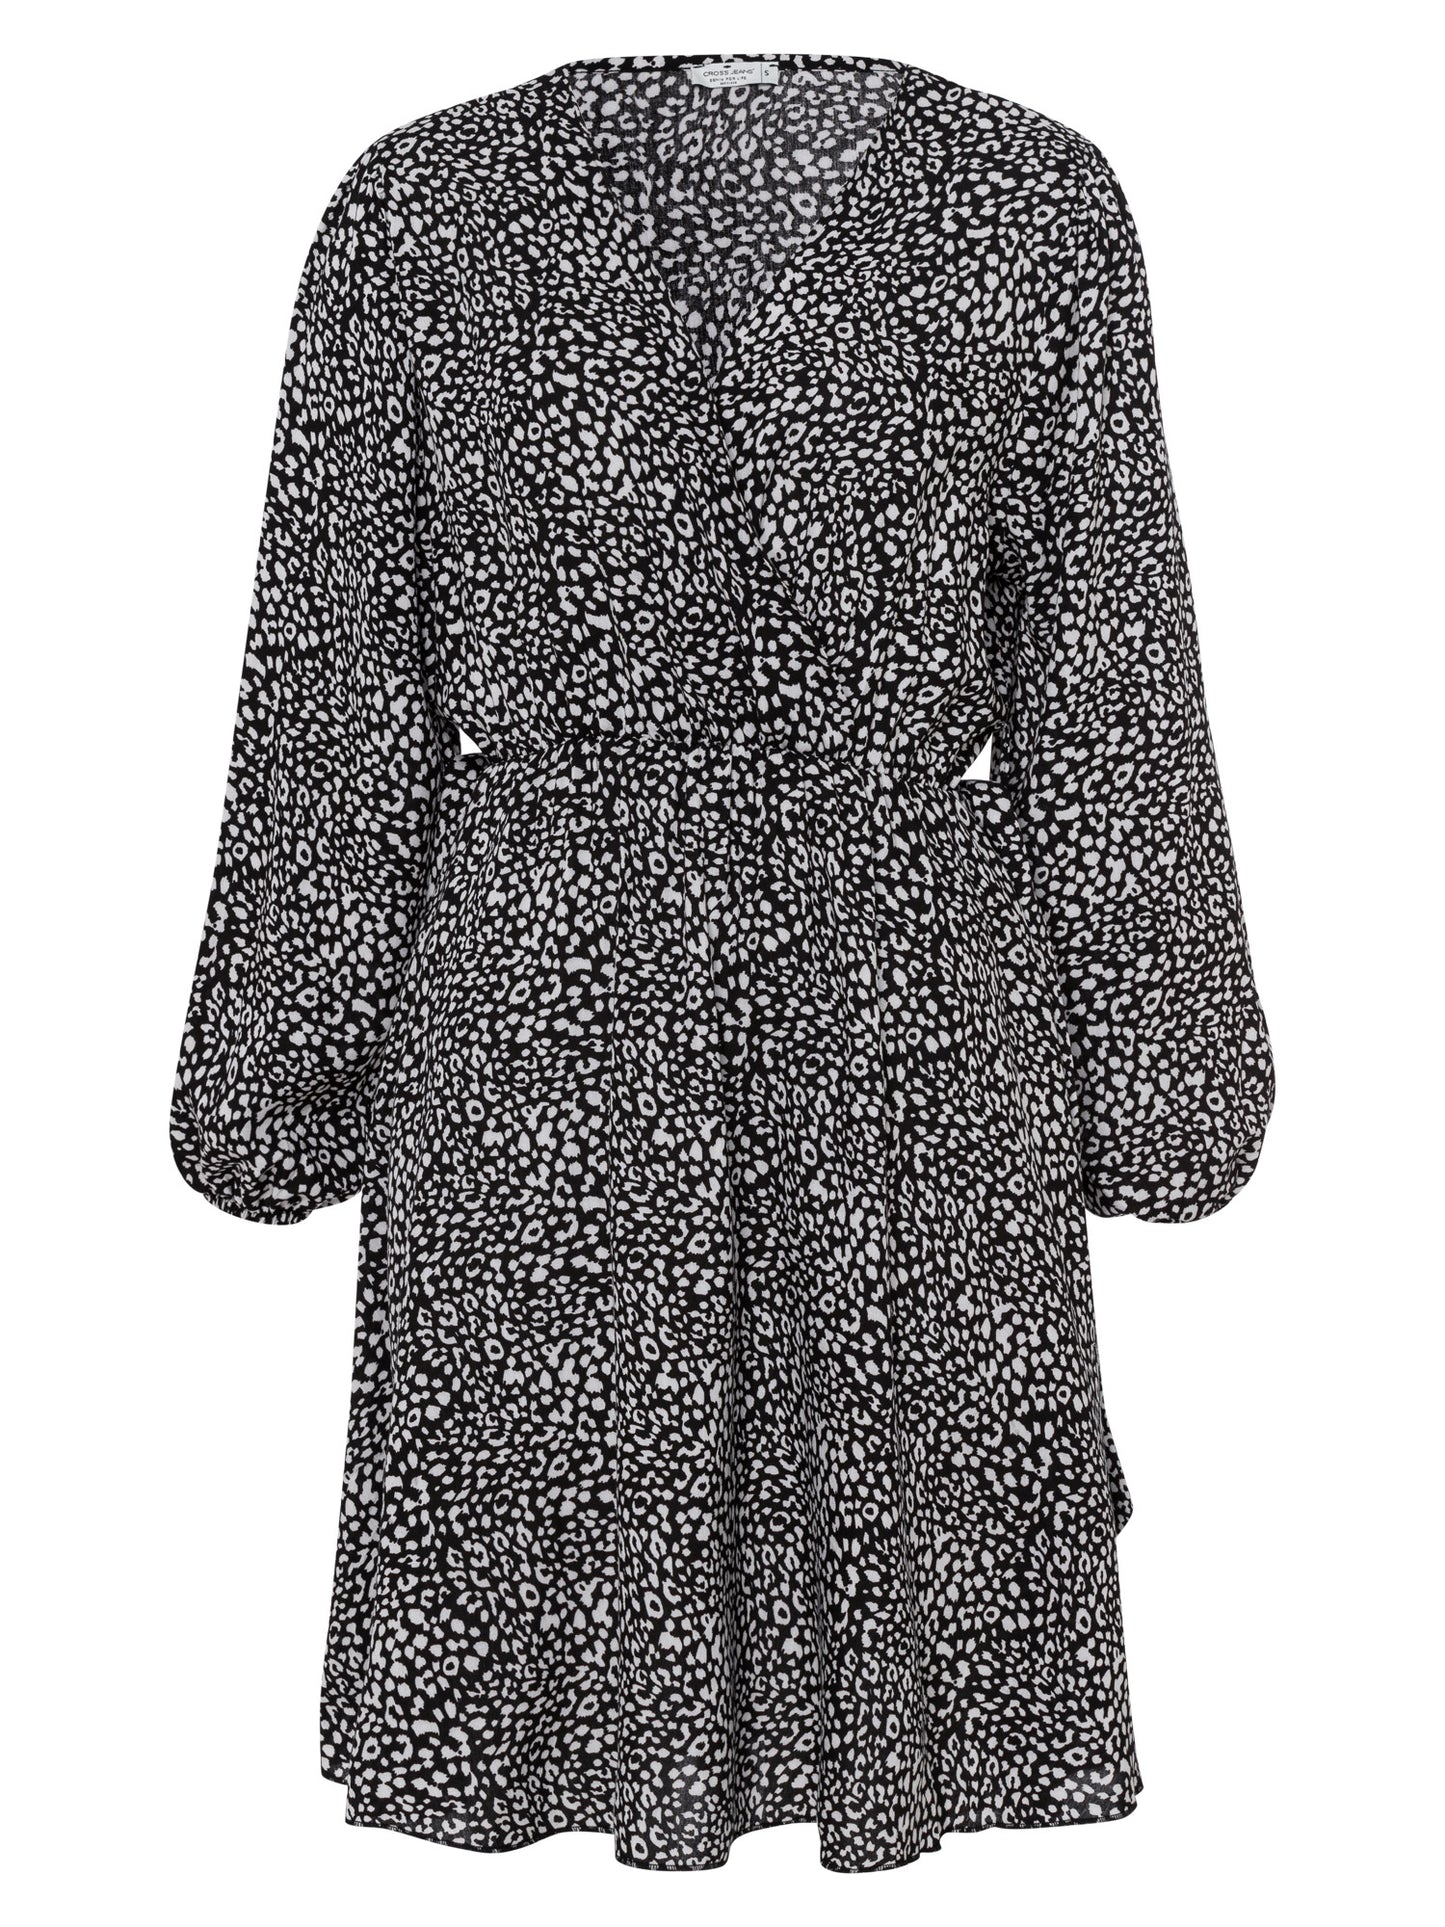 Women's dress with pattern black and white